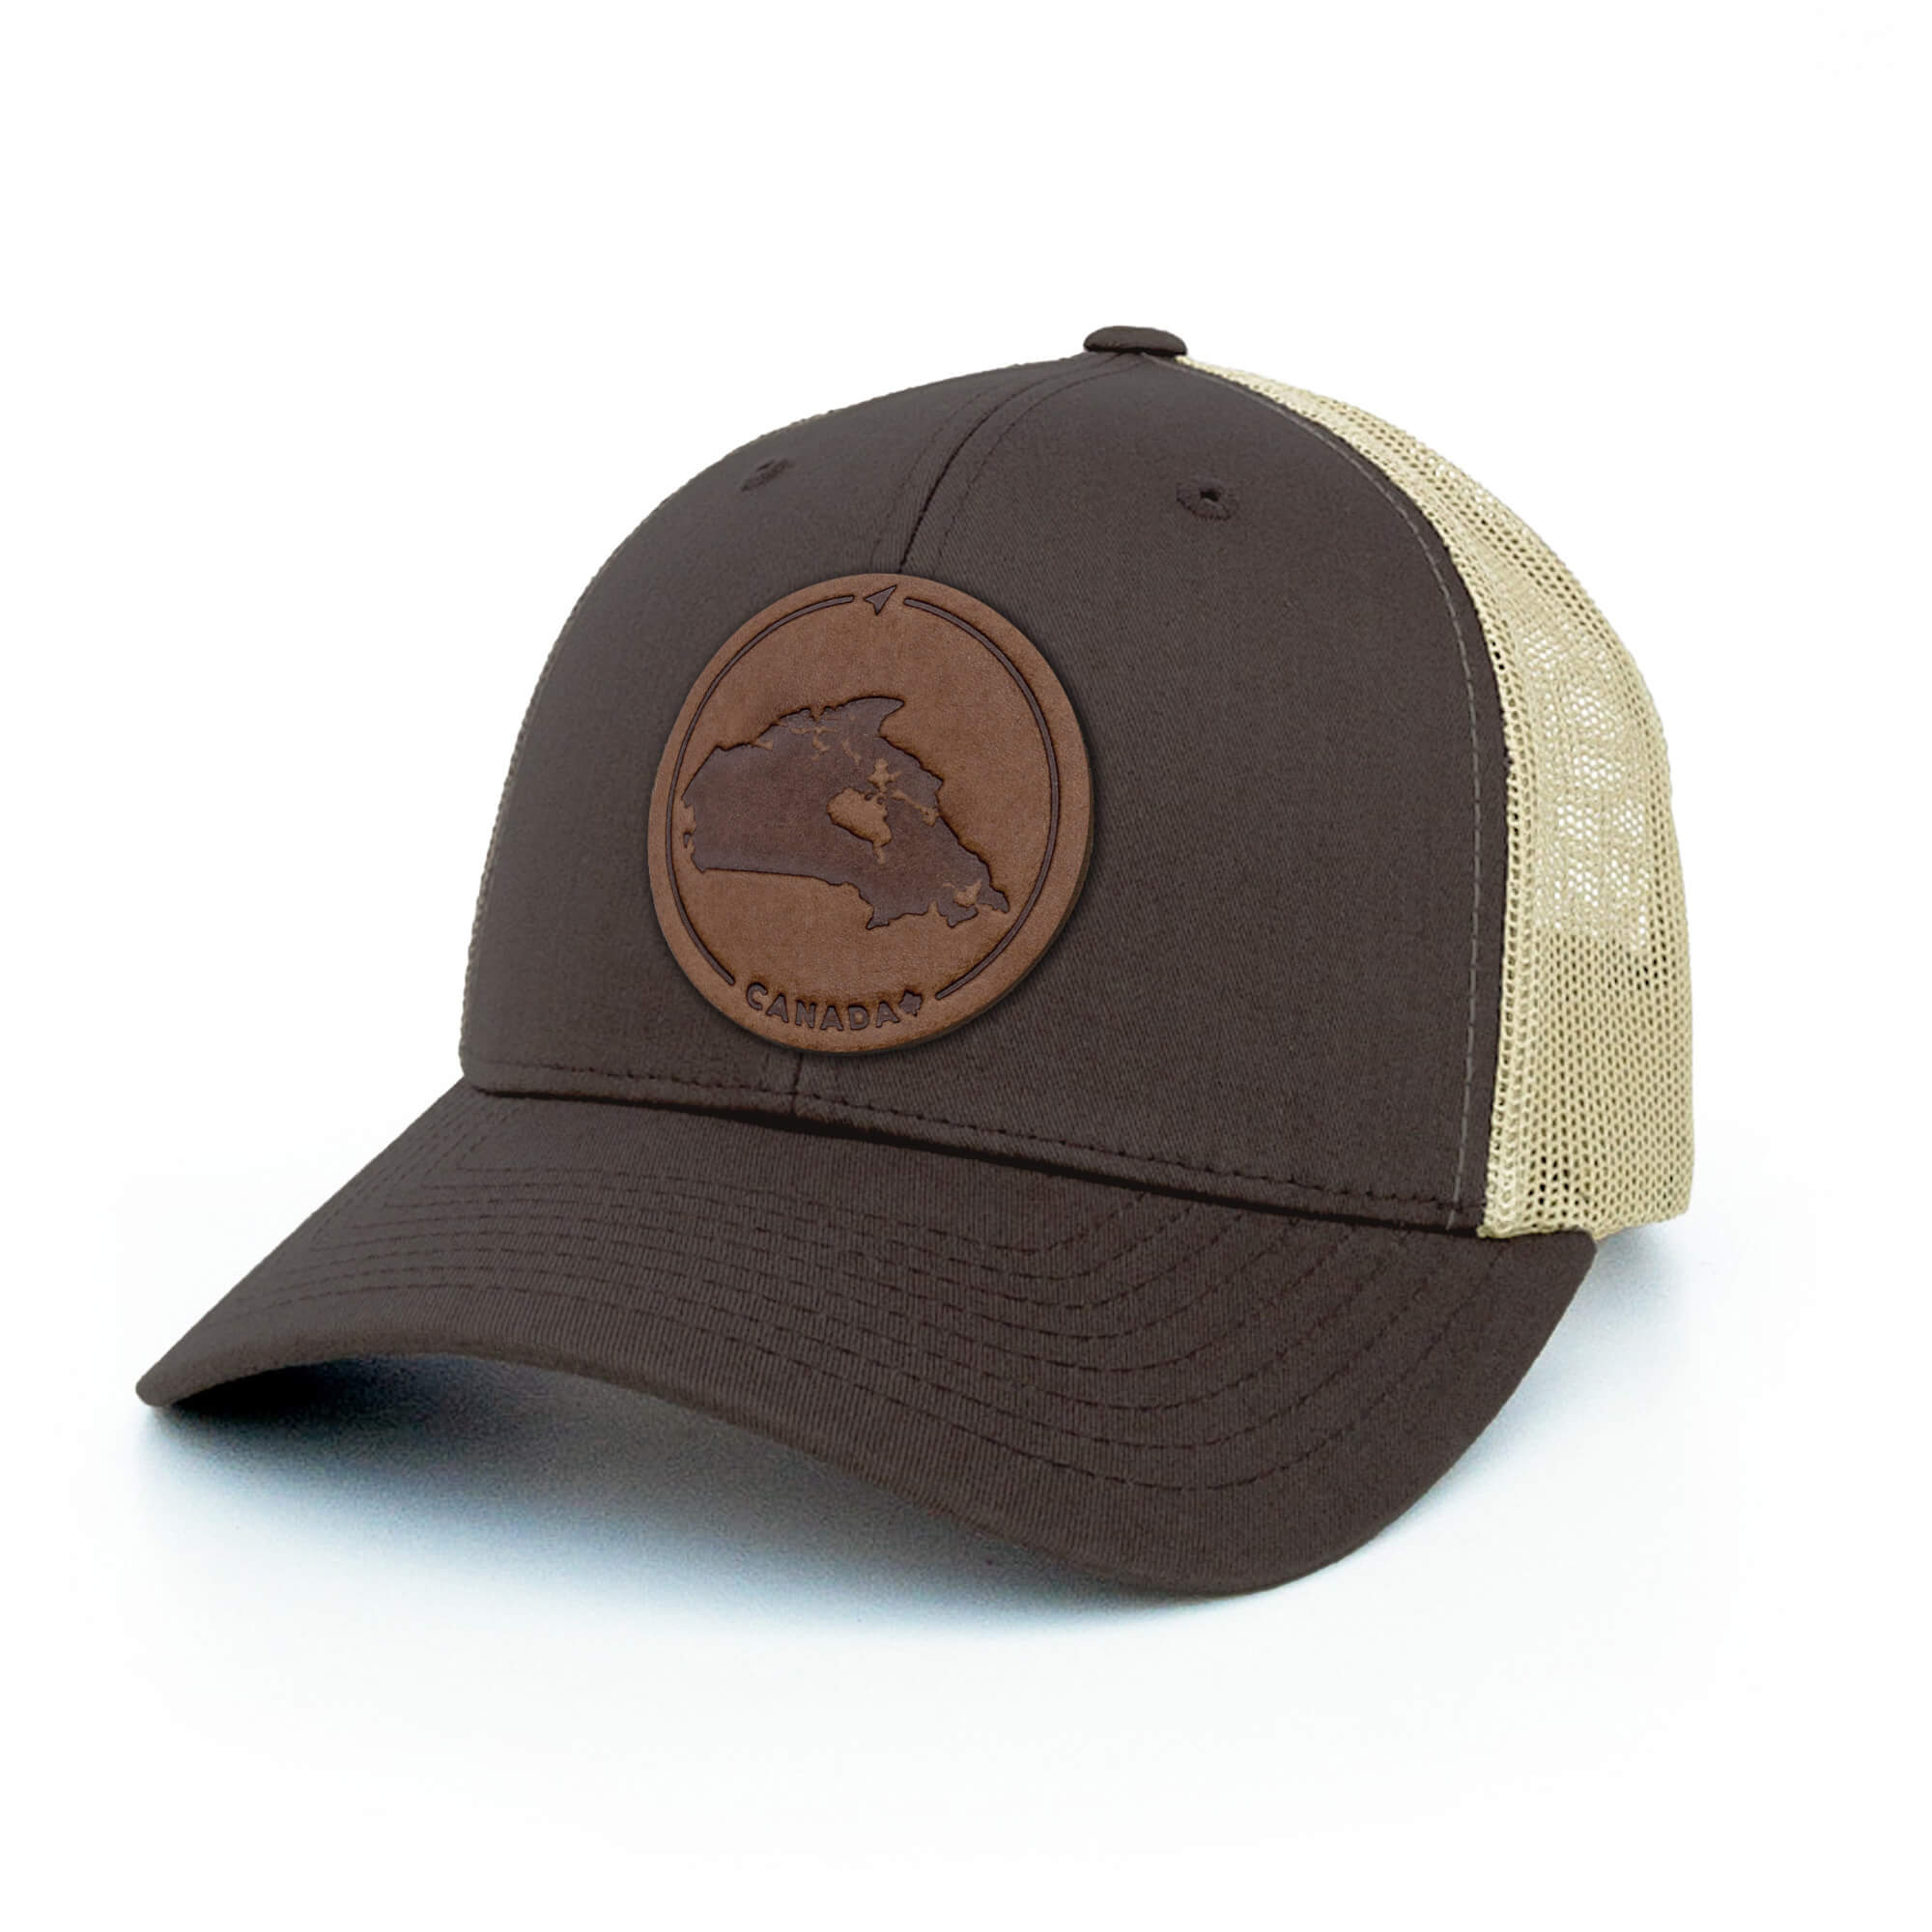 Brown and khaki trucker hat with full-grain leather patch of Canada | BLACK-002-002, CHARC-002-002, NAVY-002-002, HGREY-002-002, MOSS-002-002, BROWN-002-002, RED-002-002